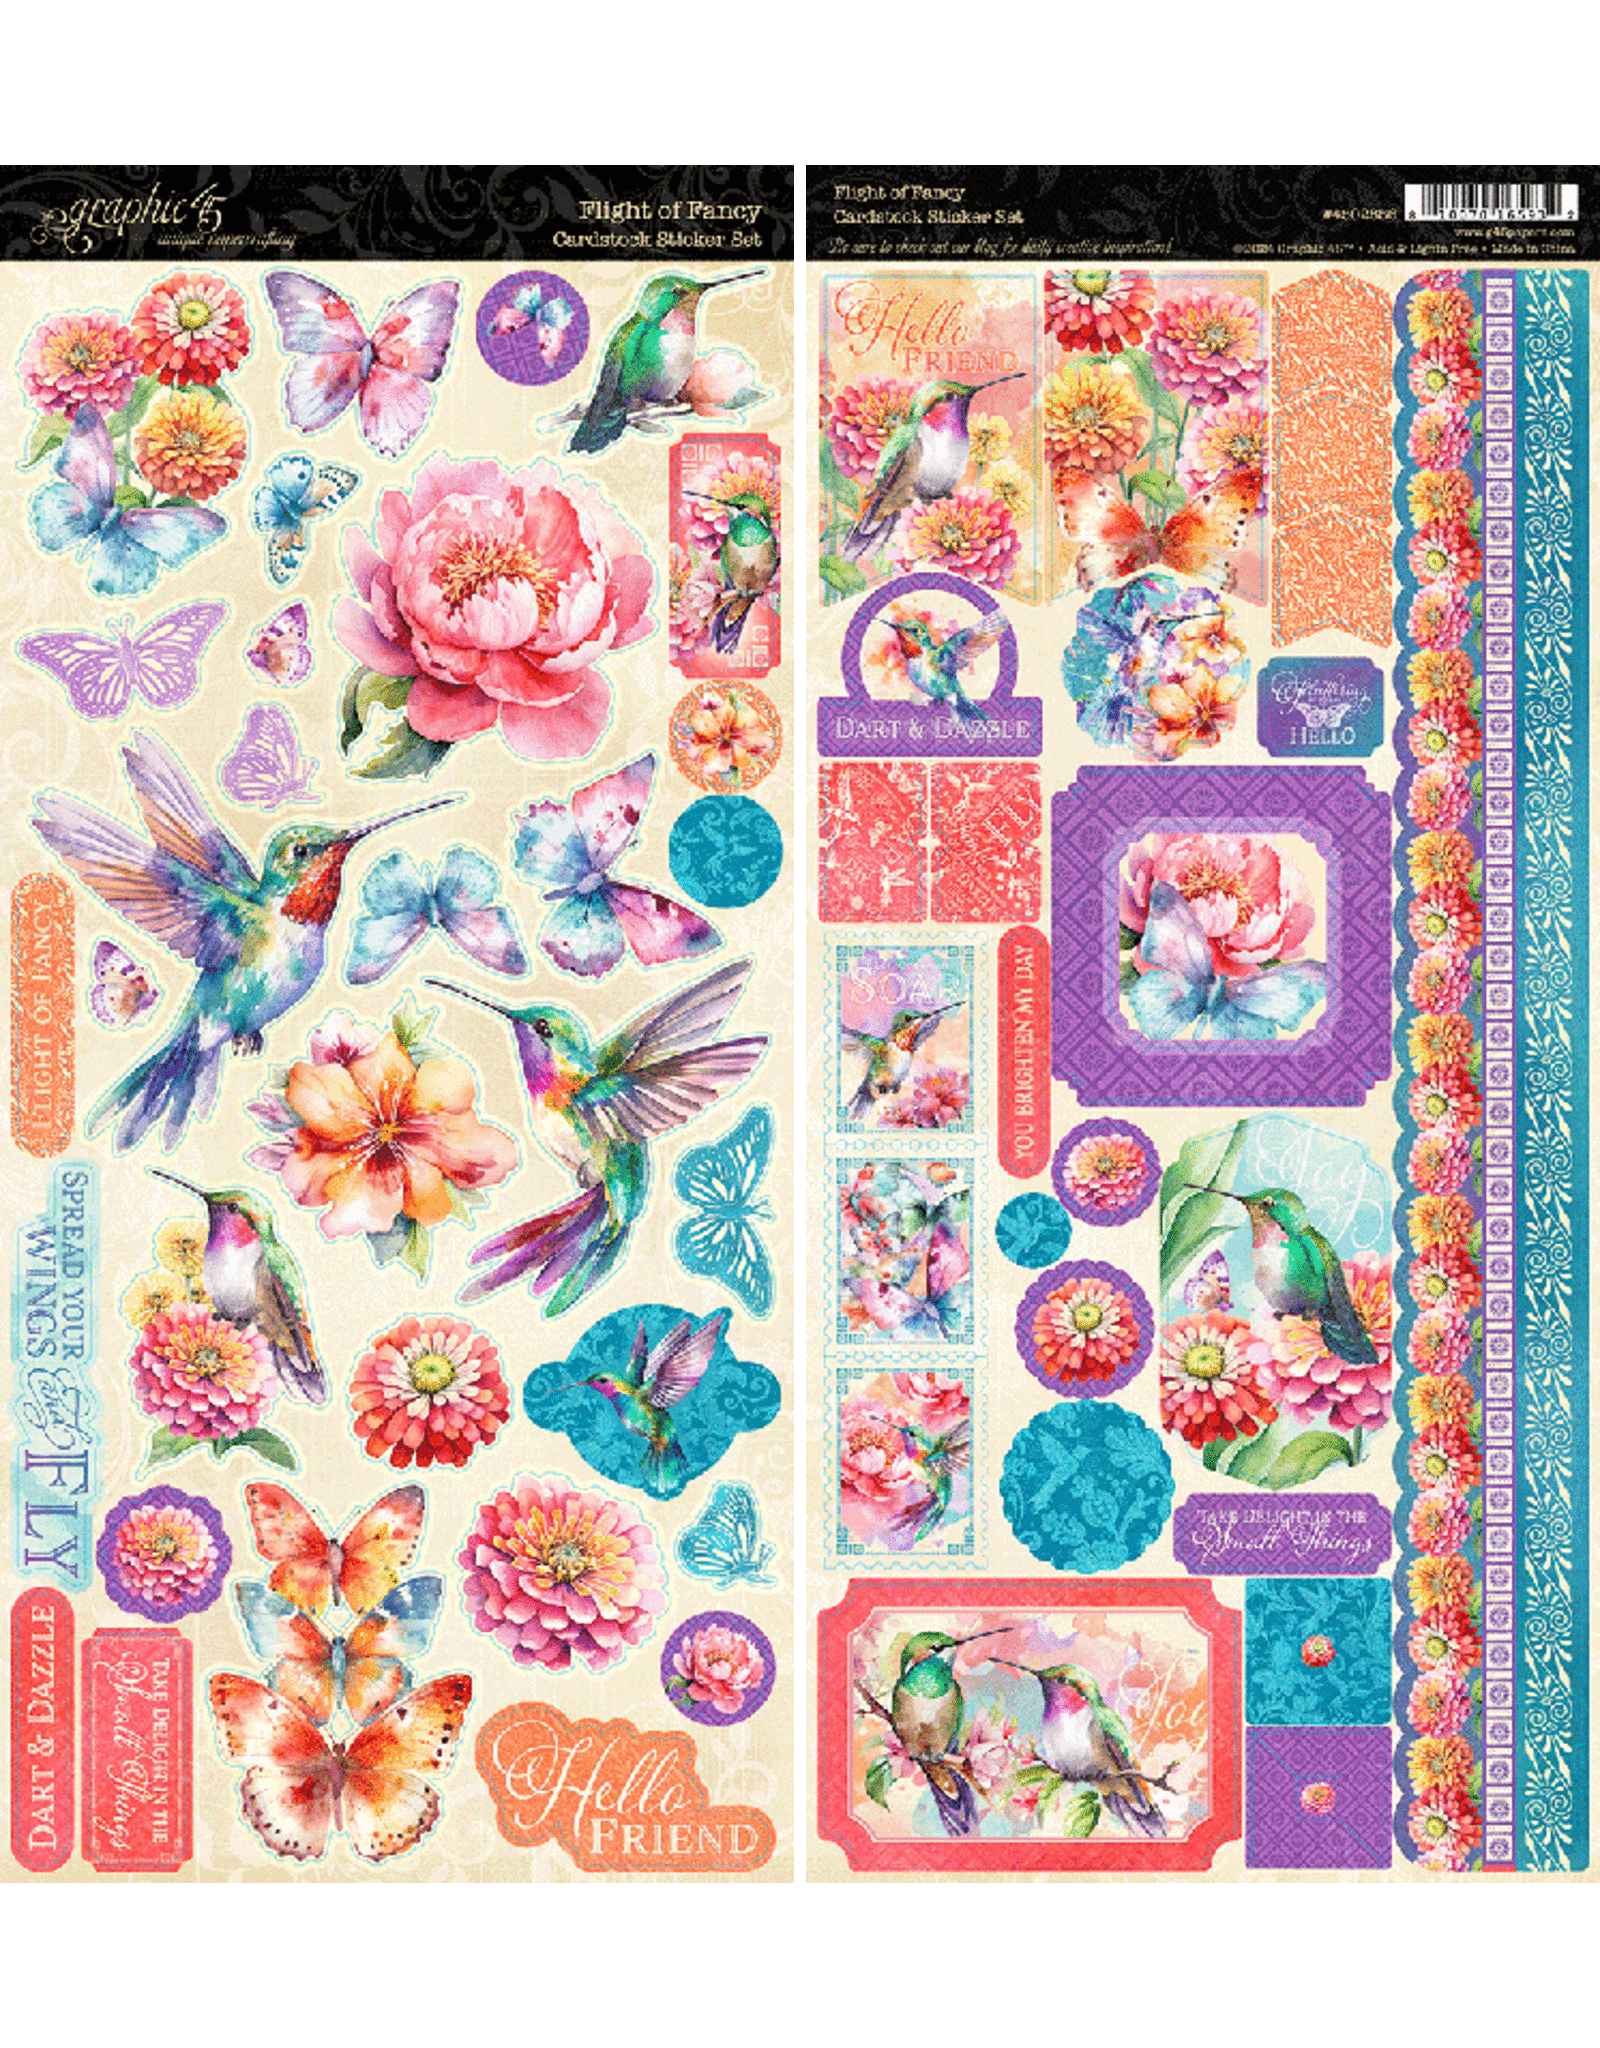 GRAPHIC 45 GRAPHIC 45 FLIGHT OF FANCY COLLECTION CARDSTOCK STICKER SET